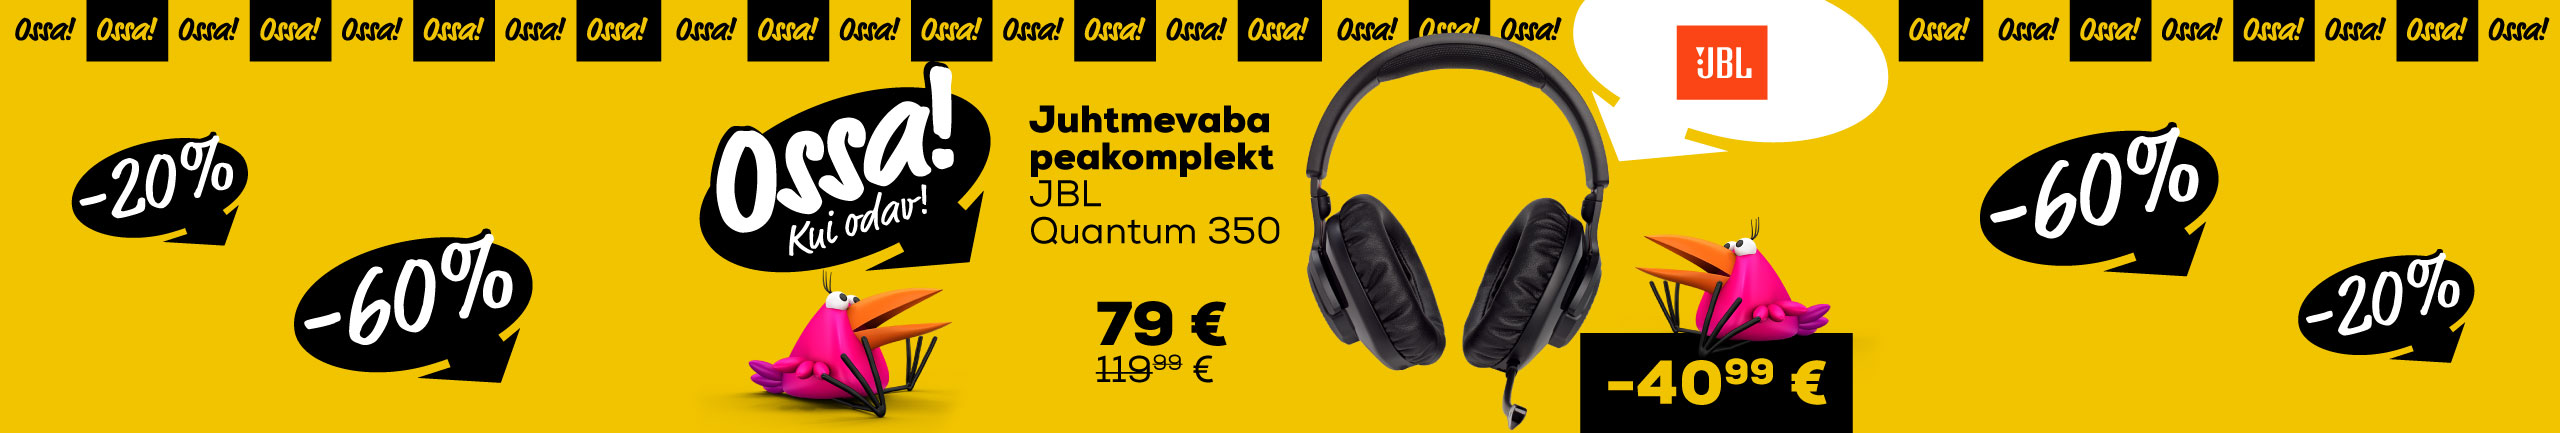 NPL Ossa extended! We added new products! Wireless Headset JBL Quantum 350 